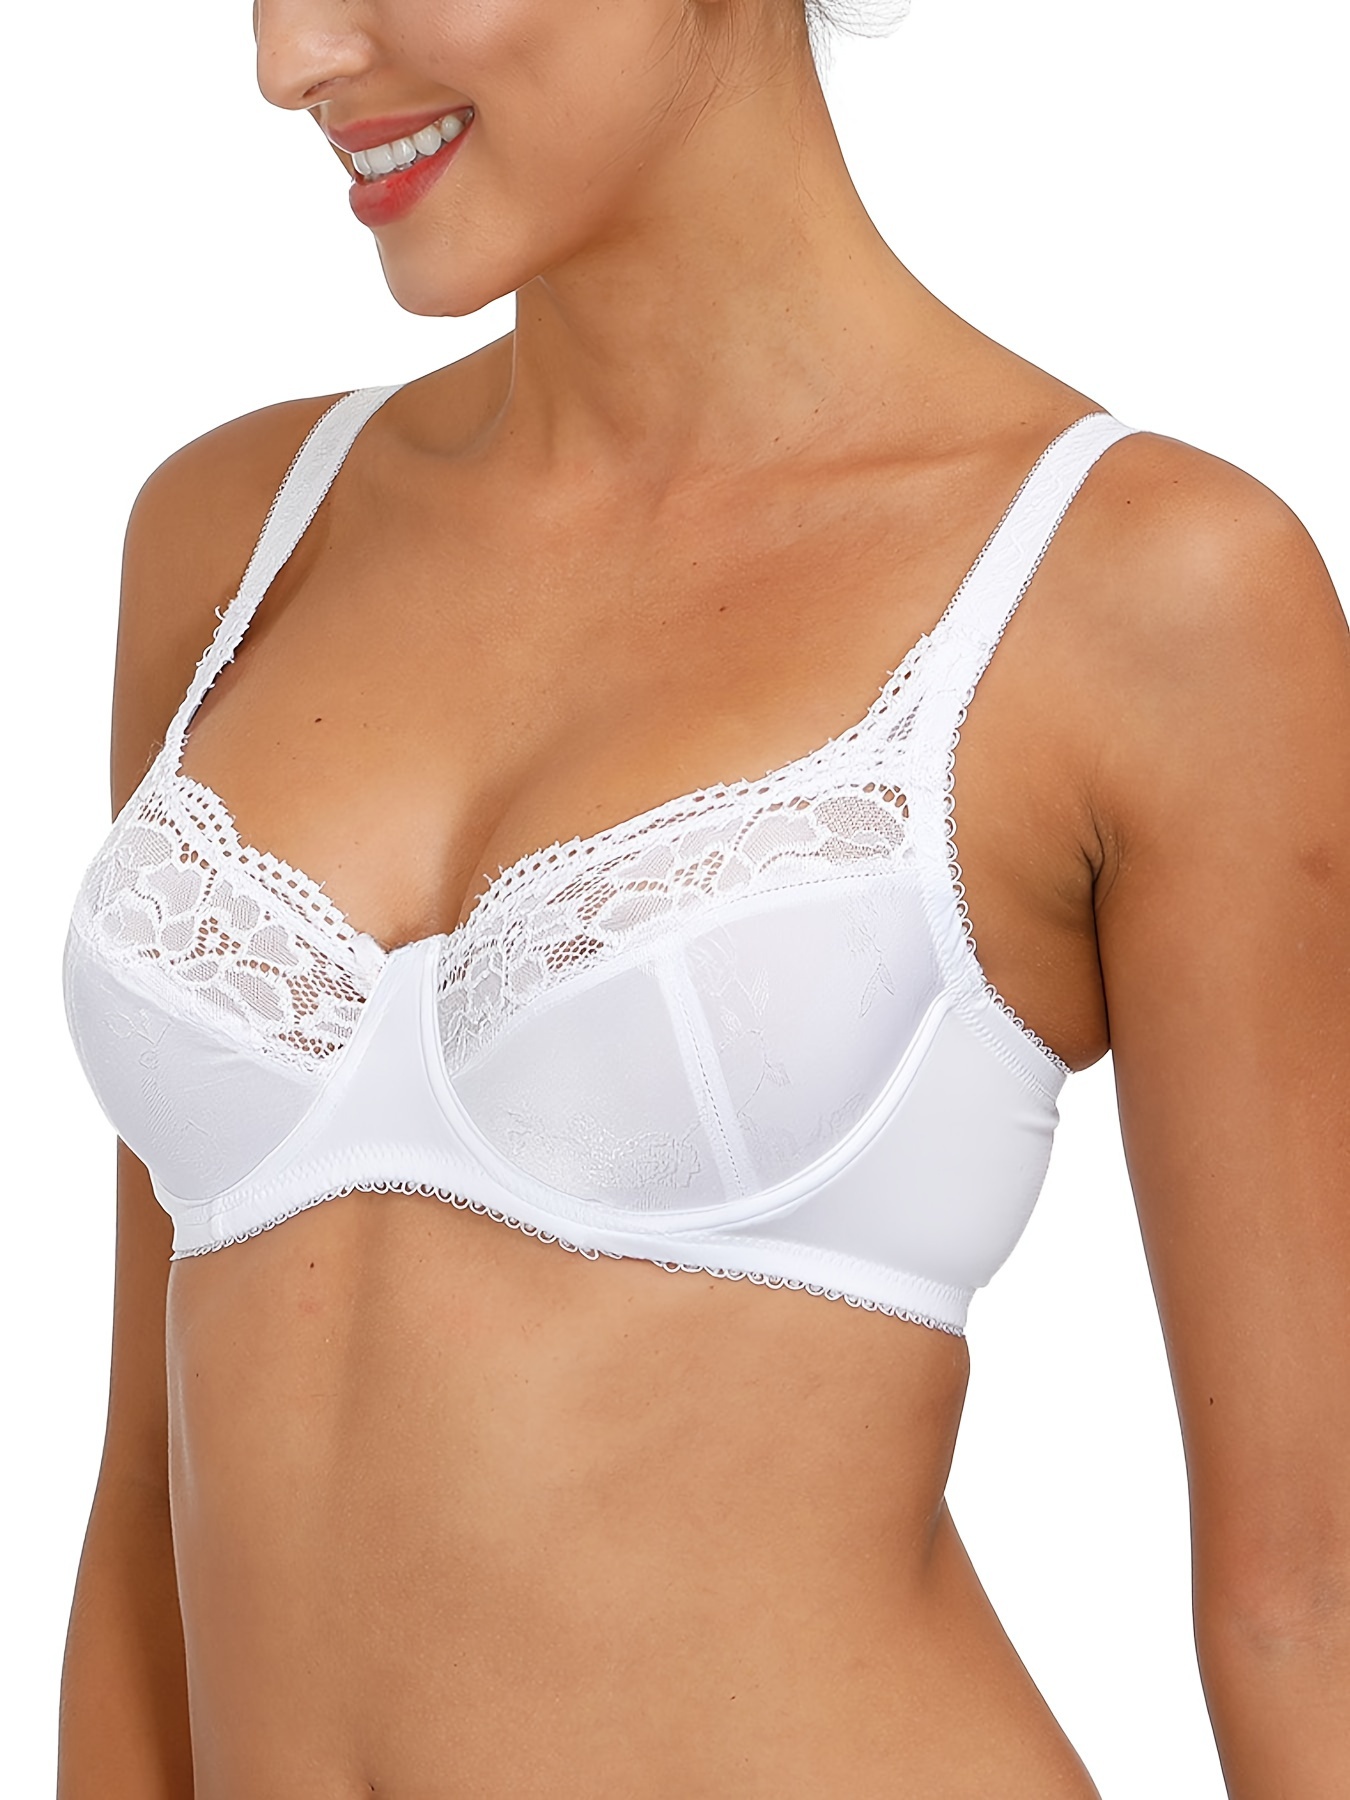  Womens Full Coverage Underwired Floral Lace Bra Plus Size  Non Padded Comfort Bra 42D White